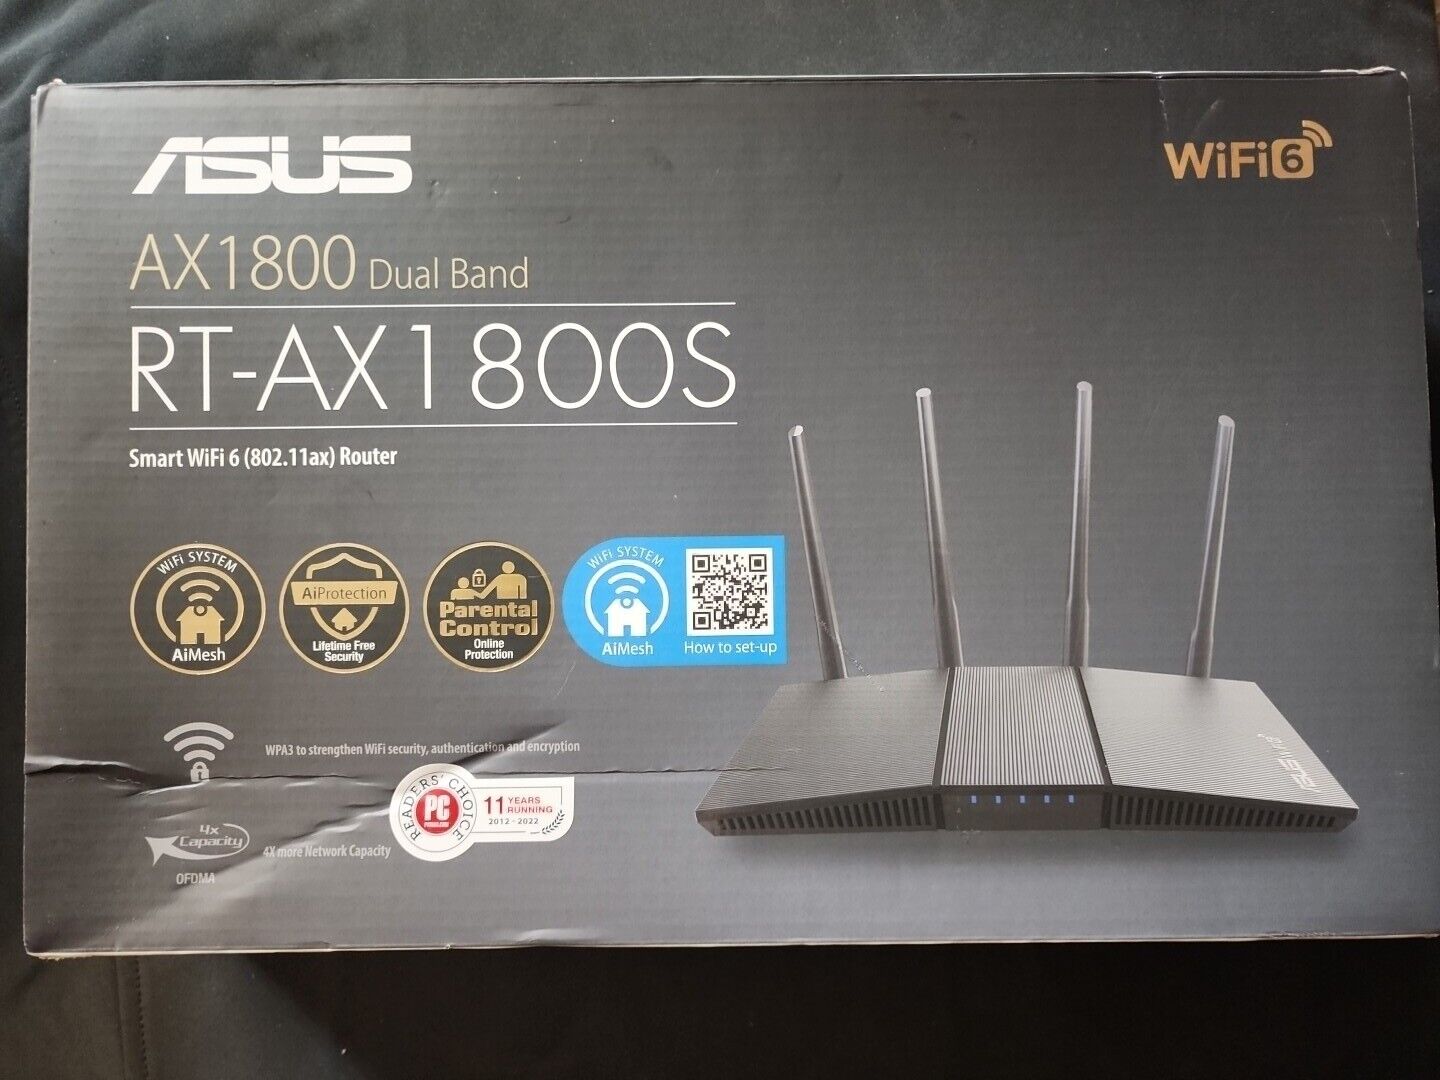 ROUTER ASUS AX1800 RT-AX1800S Dual Band WiFi 6 Extendable Router *NEW*